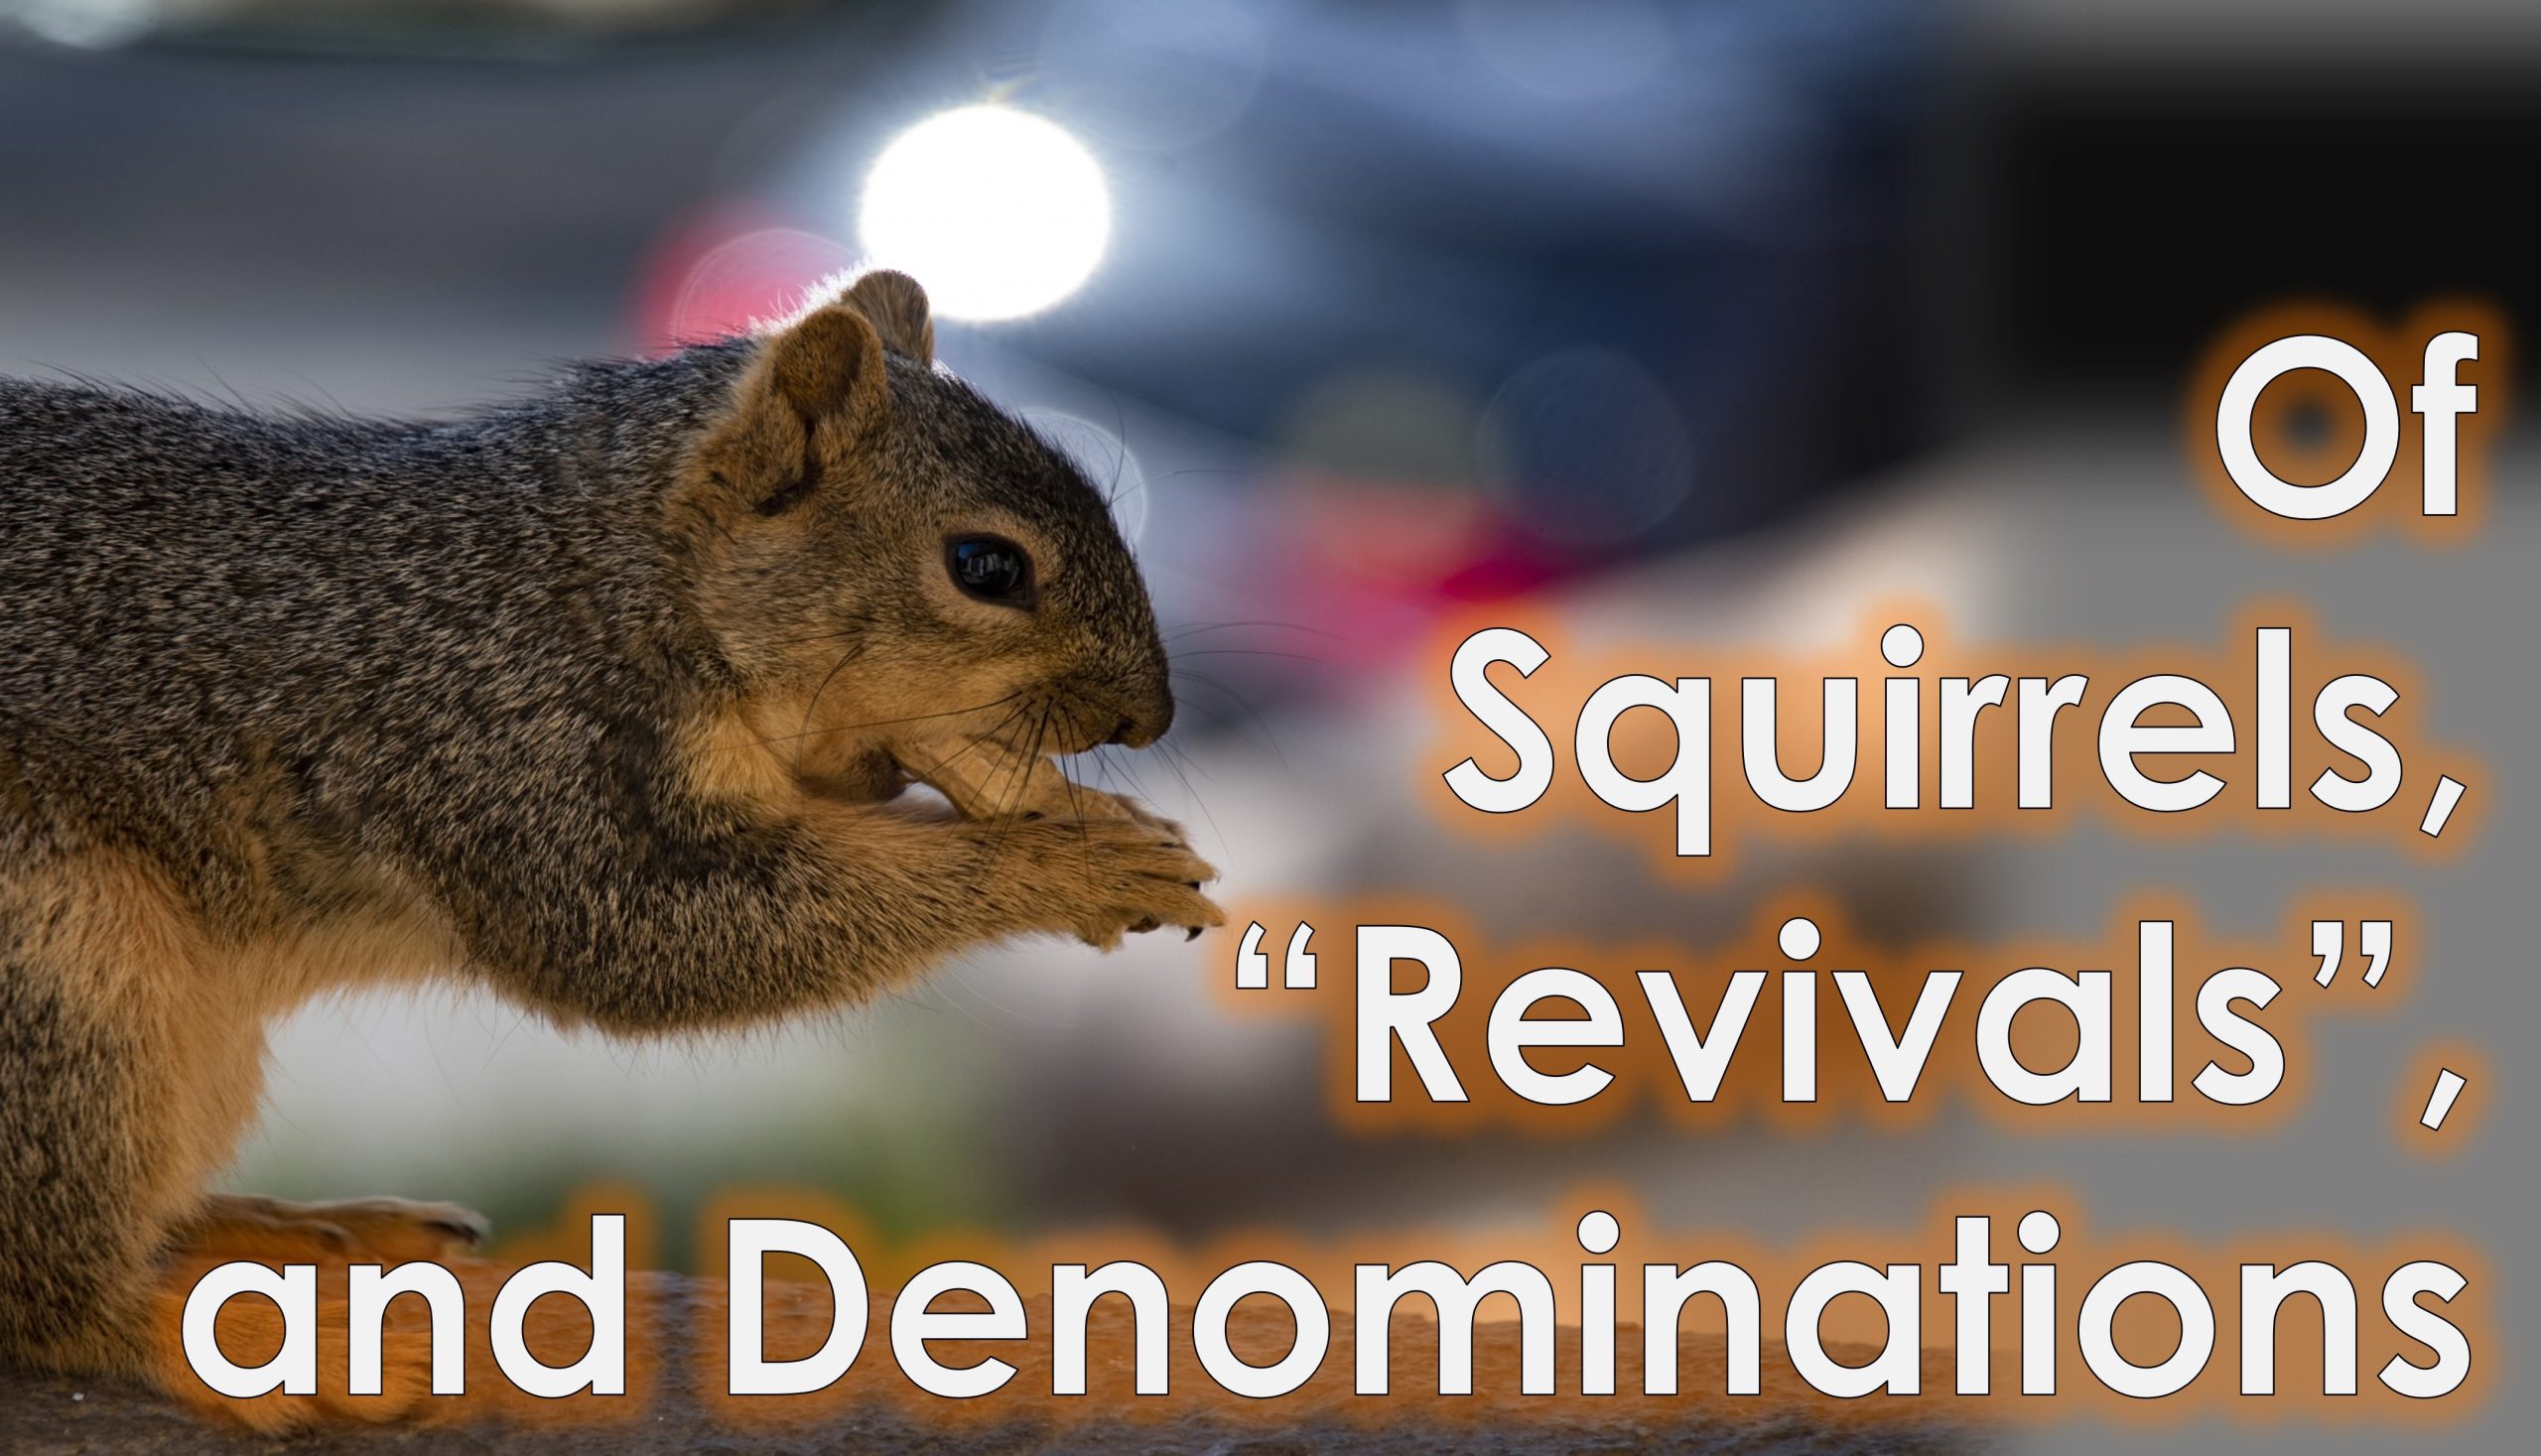 You are currently viewing Of Squirrels, “Revivals”, and Denominations – April 21st